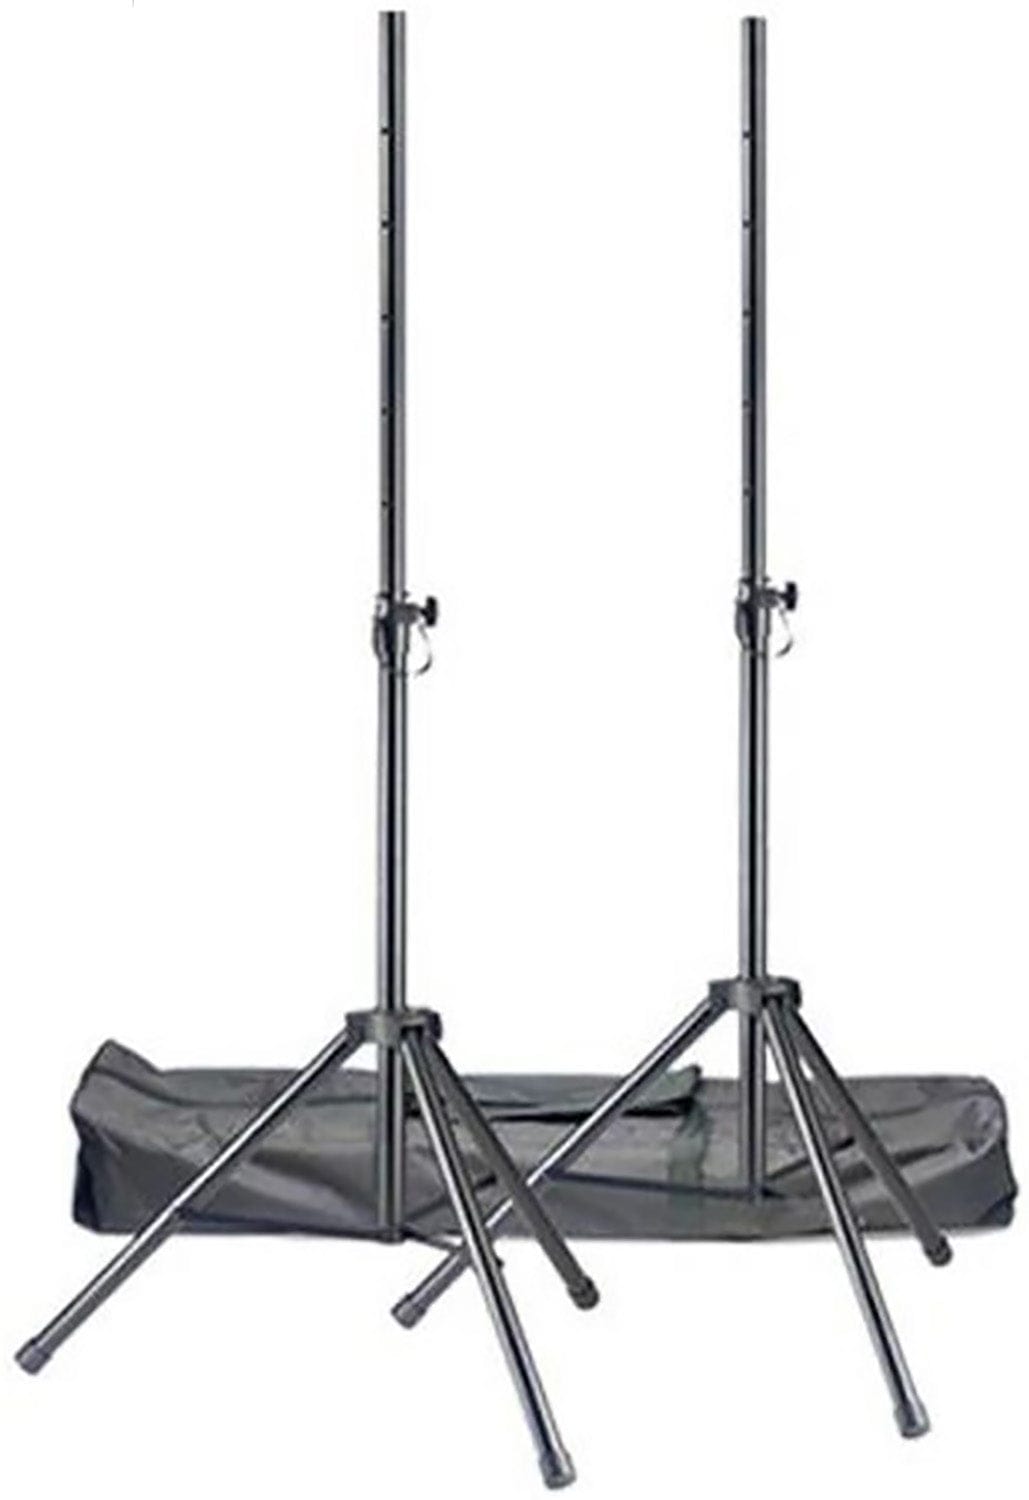 Mackie Thump212 Speakers (x2) and ProFX16v3 Analog Mixer with Stands and Cables - PSSL ProSound and Stage Lighting